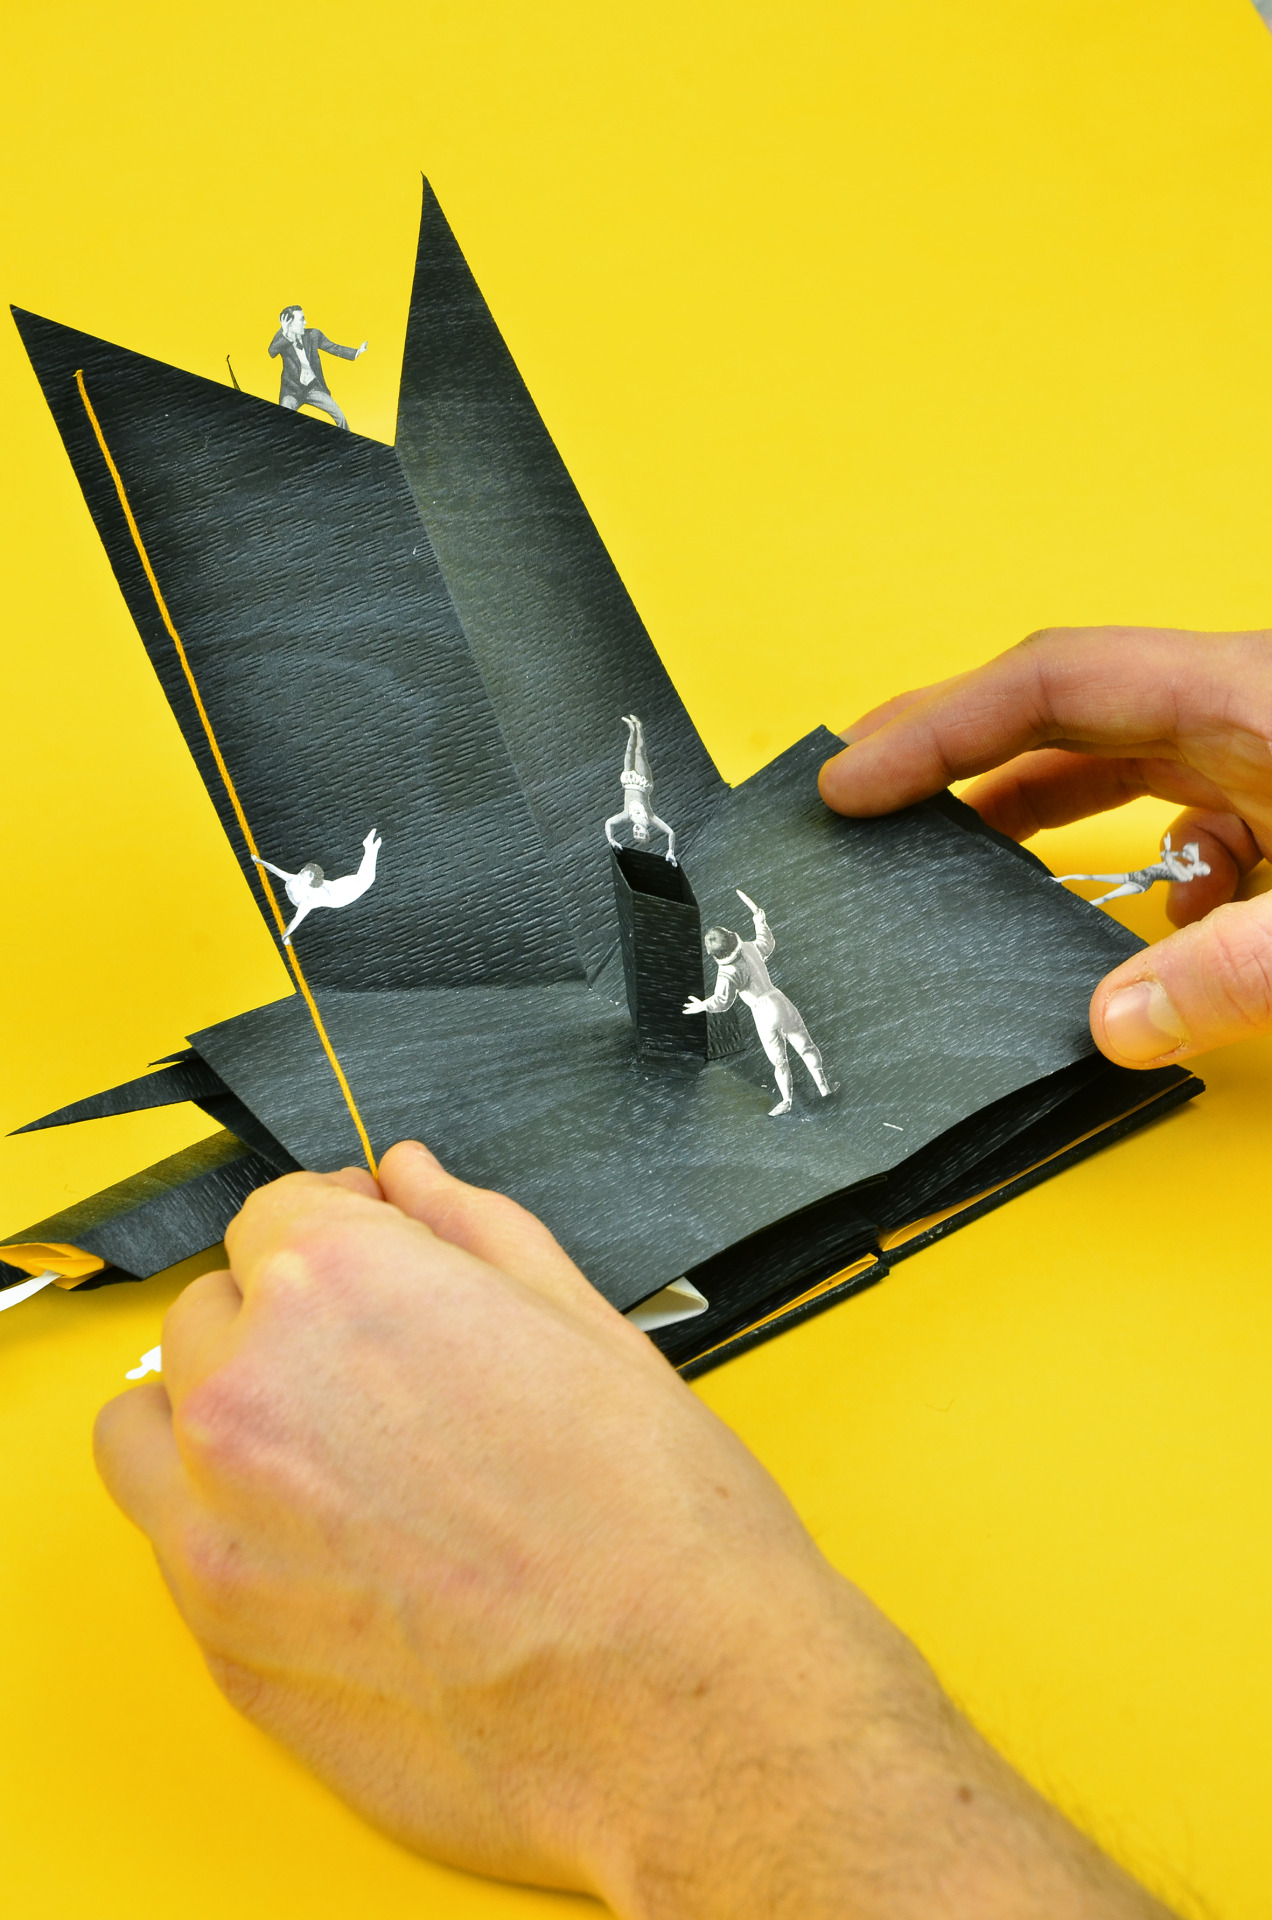 “Apriti Sesamo”, a single piece pop up book made with 120 g/m2 Manamant Paper ~ ICMA black sheet of paper faced with embossing and wood effect coloring ⚫️
👉🏻 The book, made on the basis of a leporello, contains elements and figures coming from old...